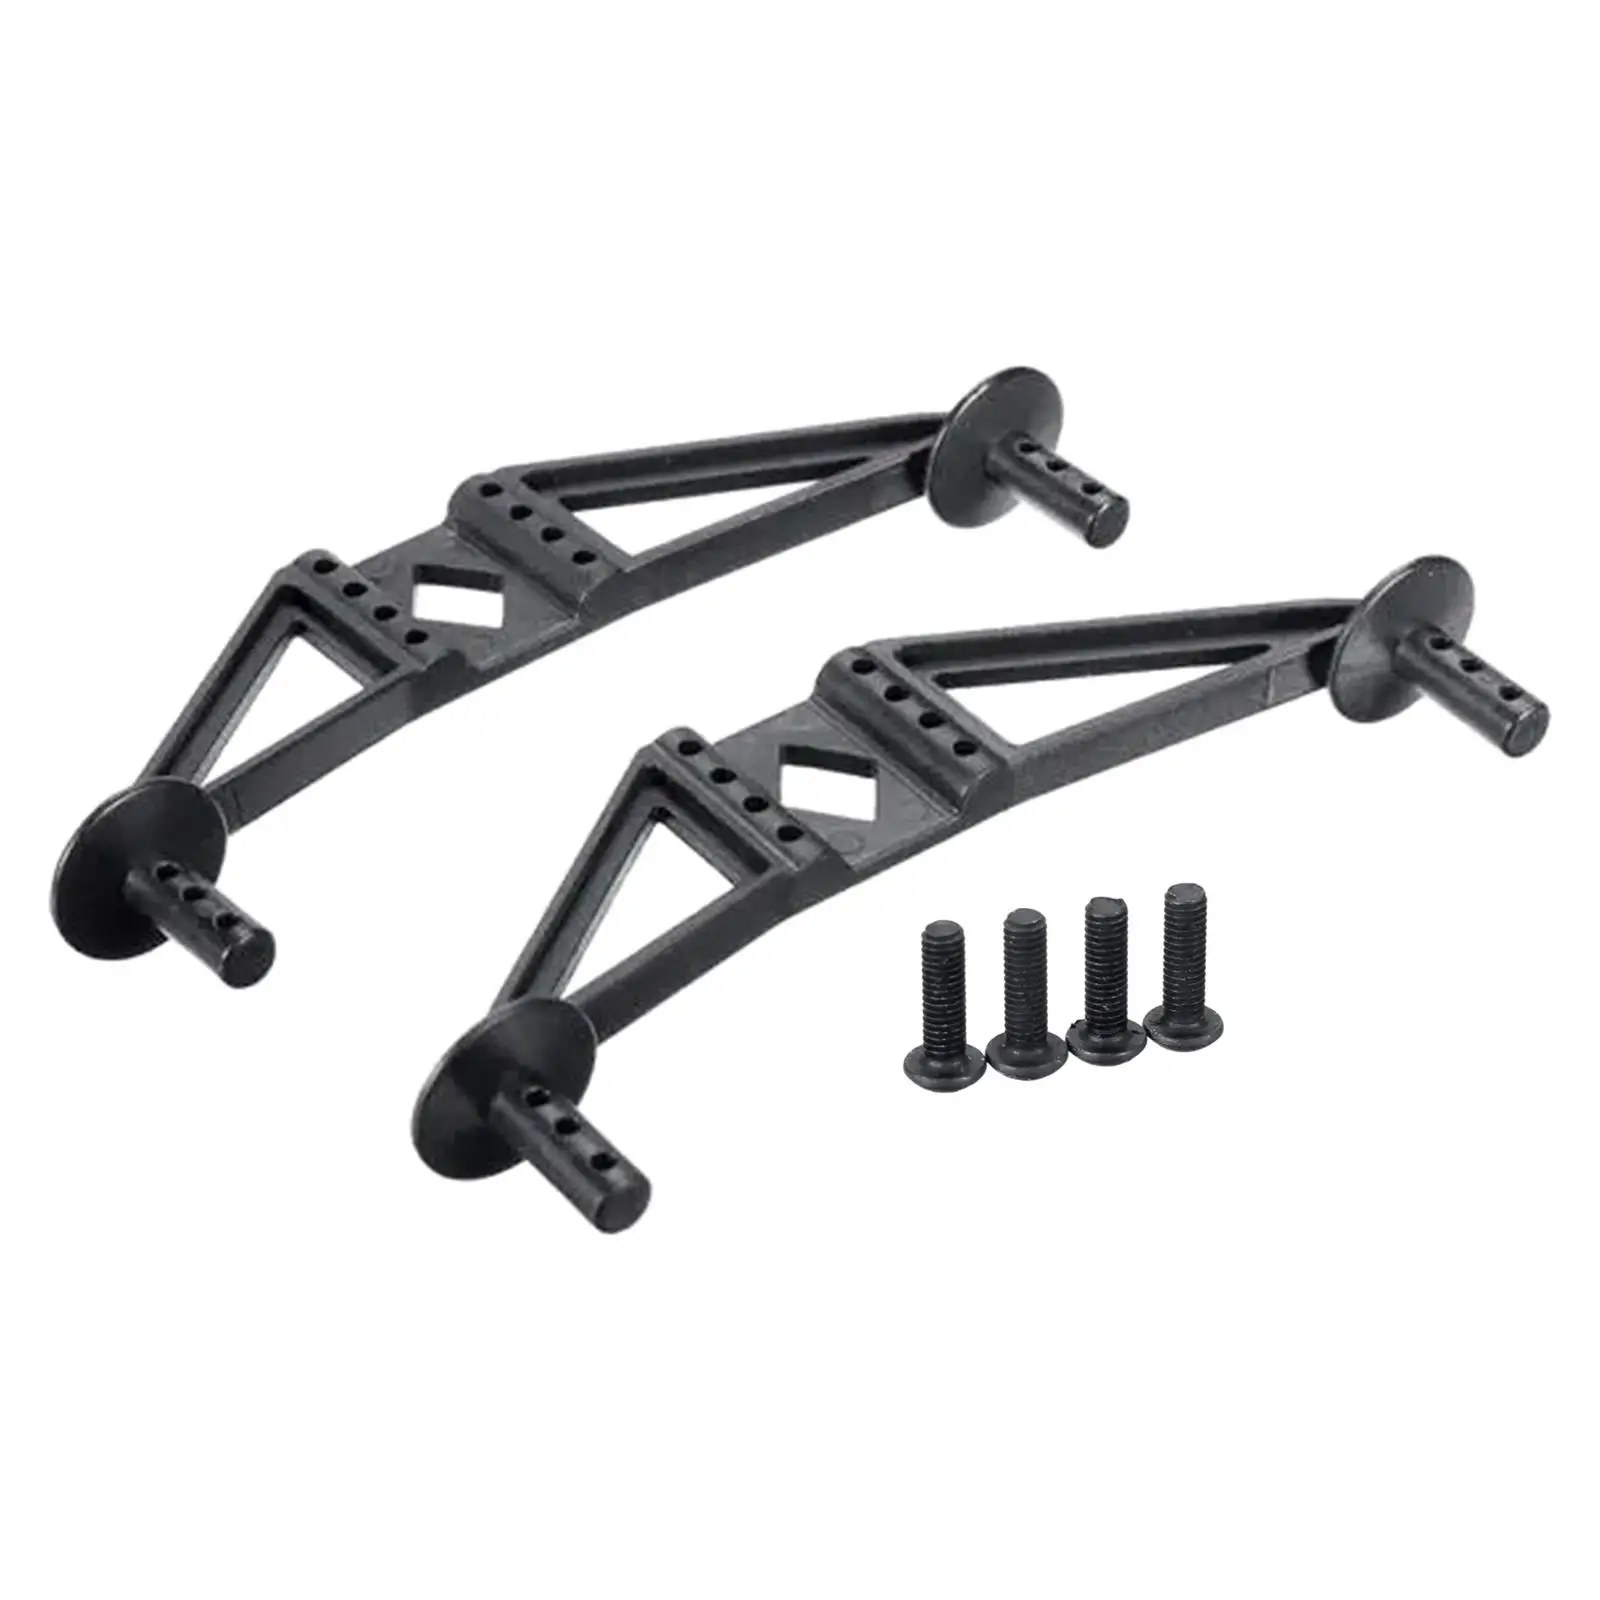 2 Pieces Body Mounts Post Spare Parts Replacement Accessories Upgrades Parts for Jlb  Cheetah 1:10  Truck